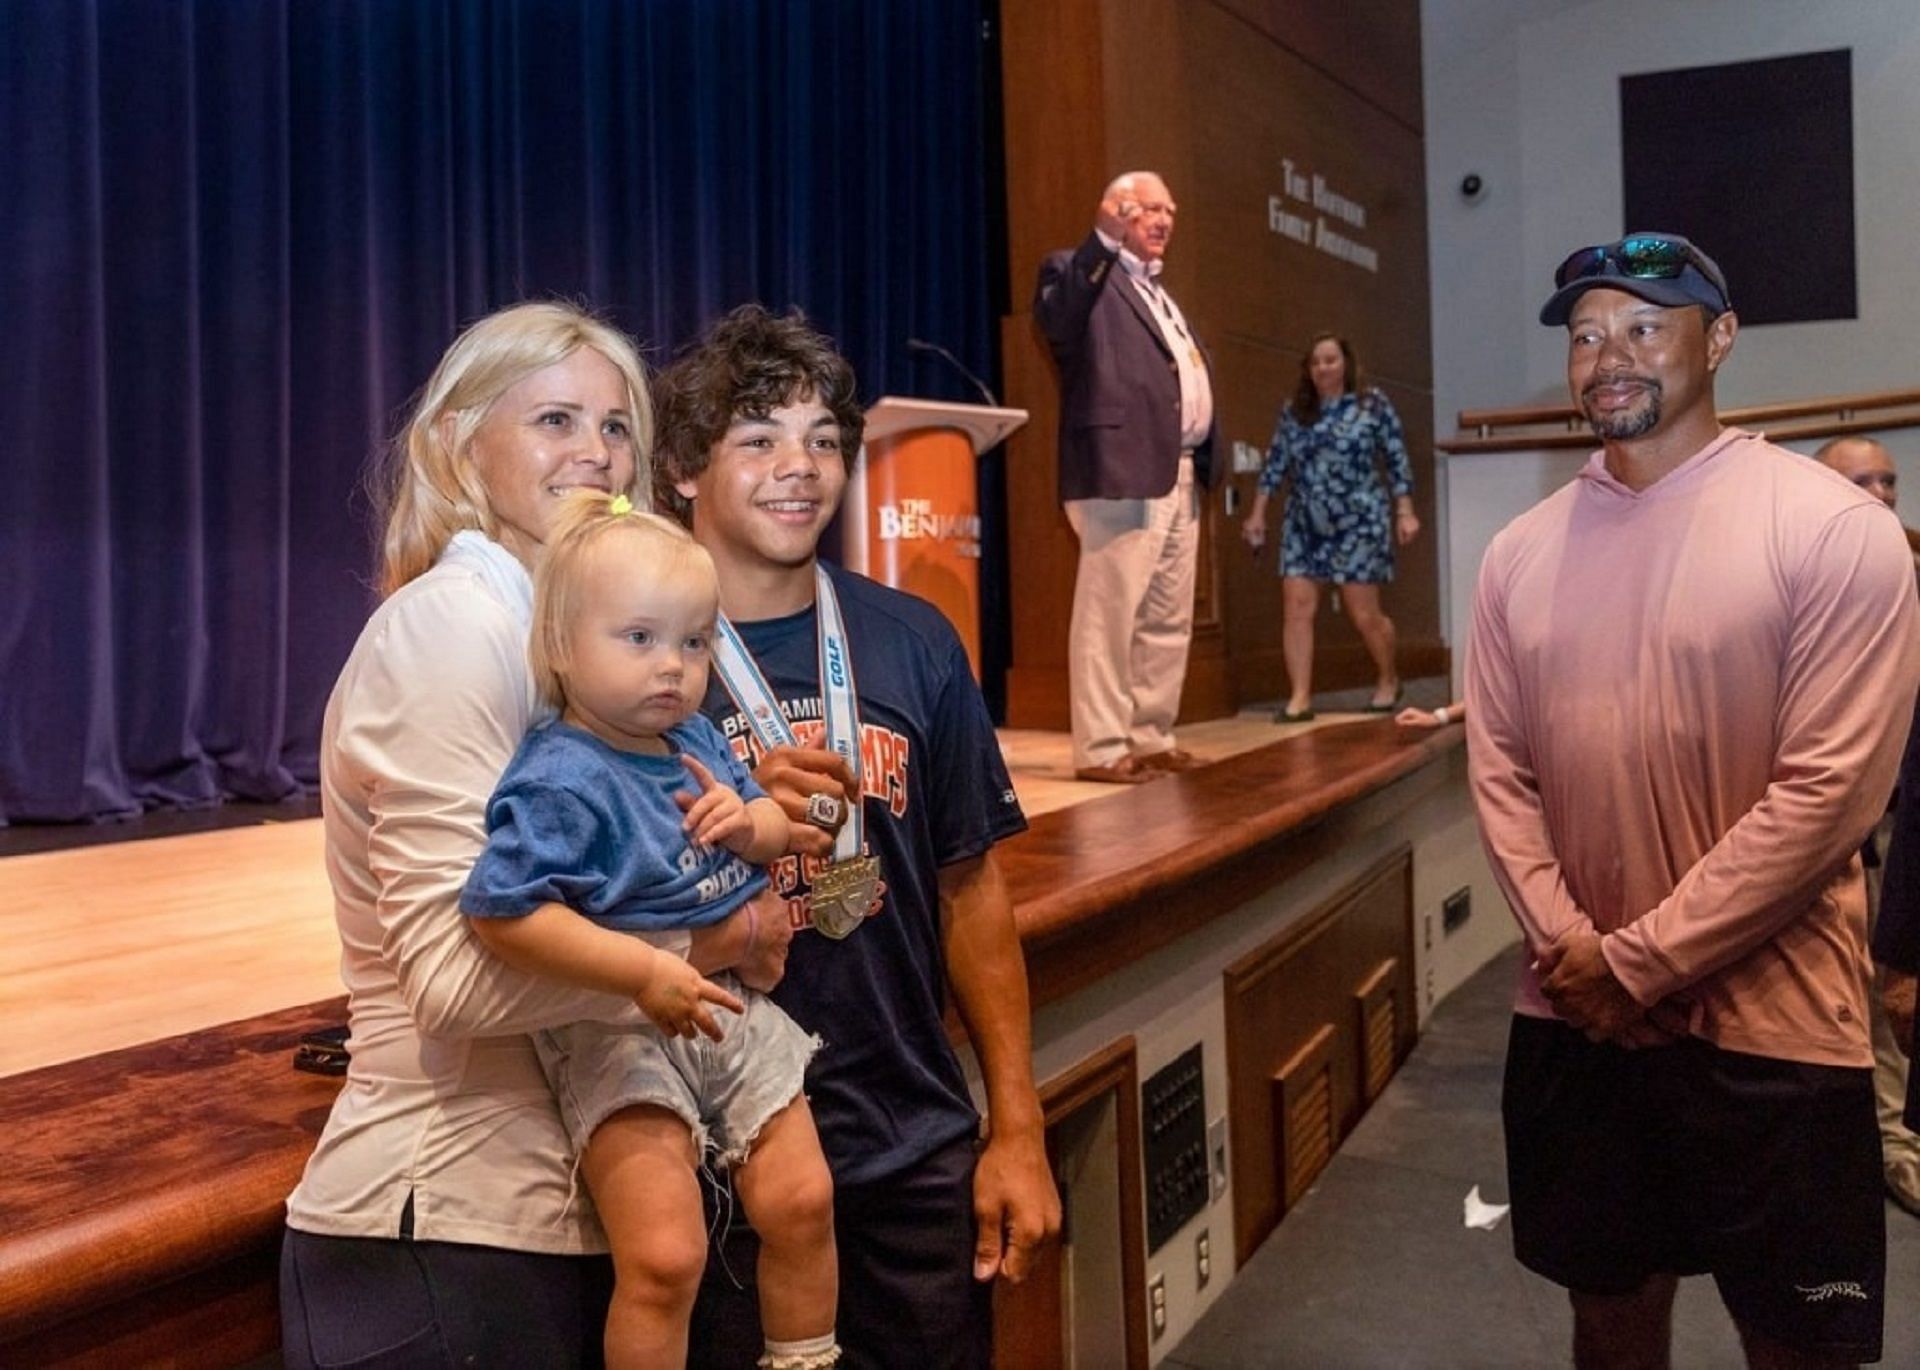 Charlie Woods poses with his mother Elin Nordegren, while Tiger Woods looks during the ring presentation ceremony at the Benjamin School in Florida for being state champions.